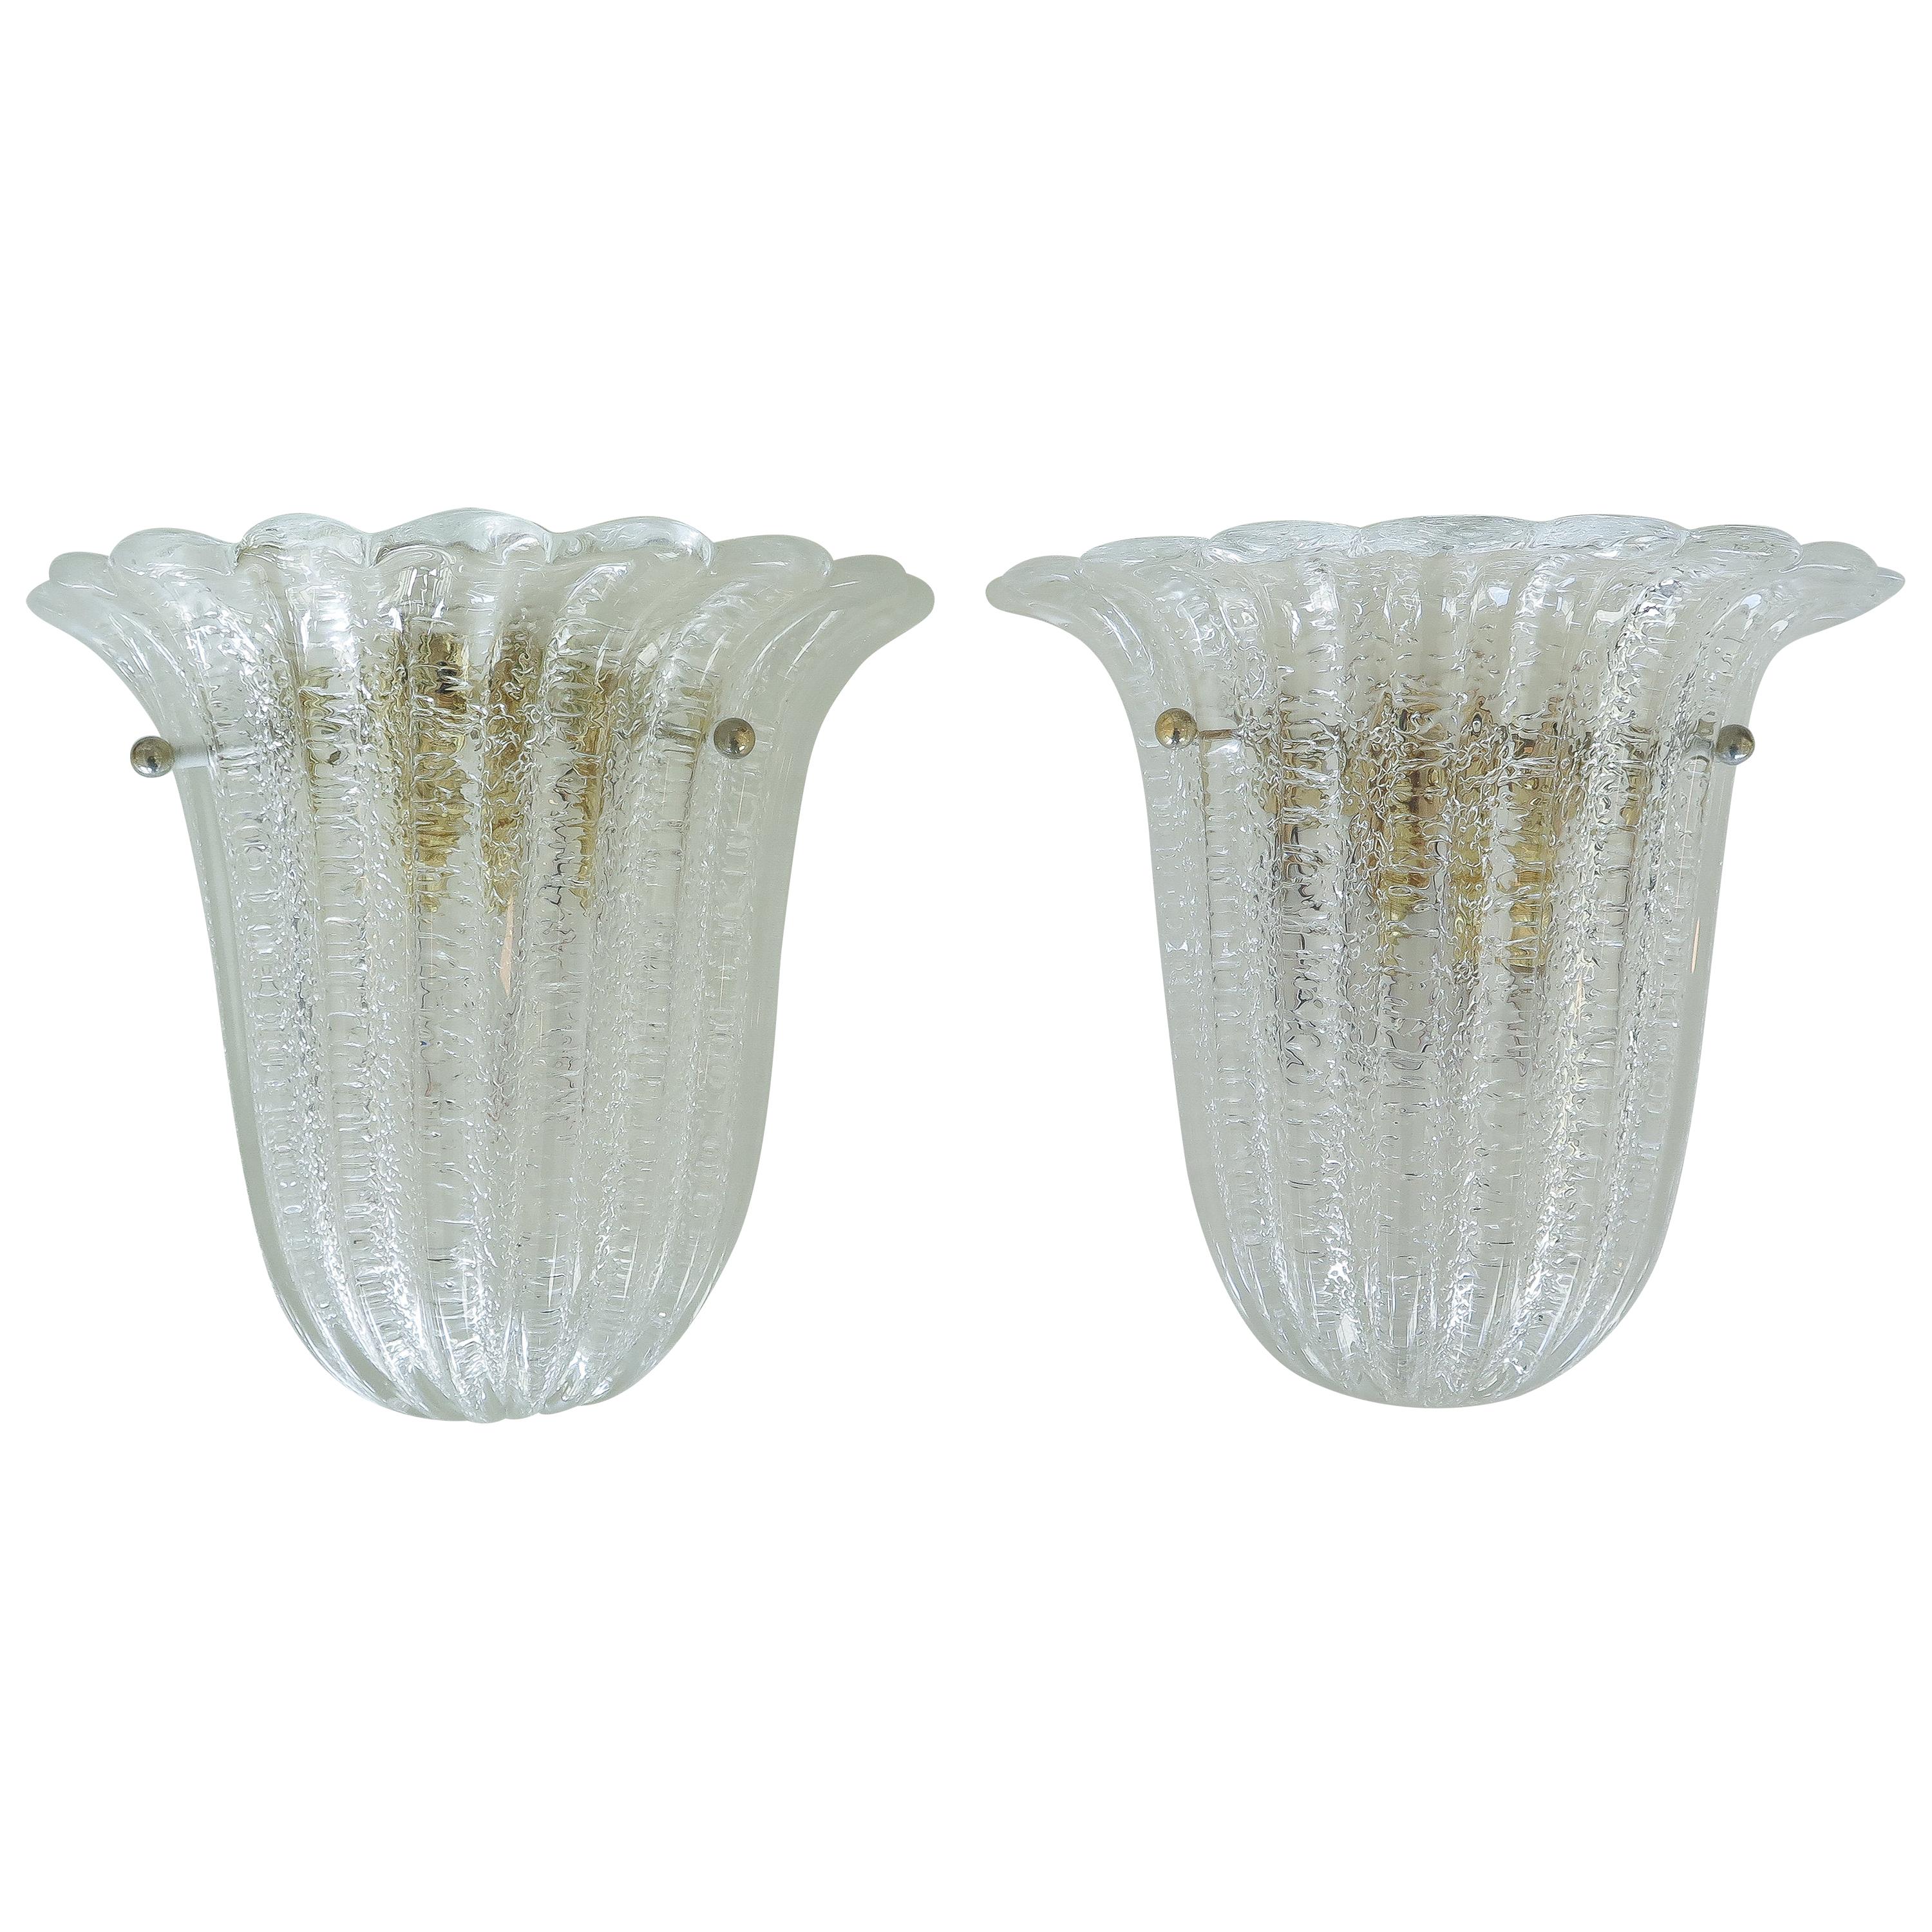 Beautiful pair of Italian Murano glass sconces by Barovier & Toso. Fluted shell shape with scalloped top edge, wavy ribbed glass and brass ball detailing. Brass-plated metal back plate with one socket, newly rewired.
5 sconces available, sold as